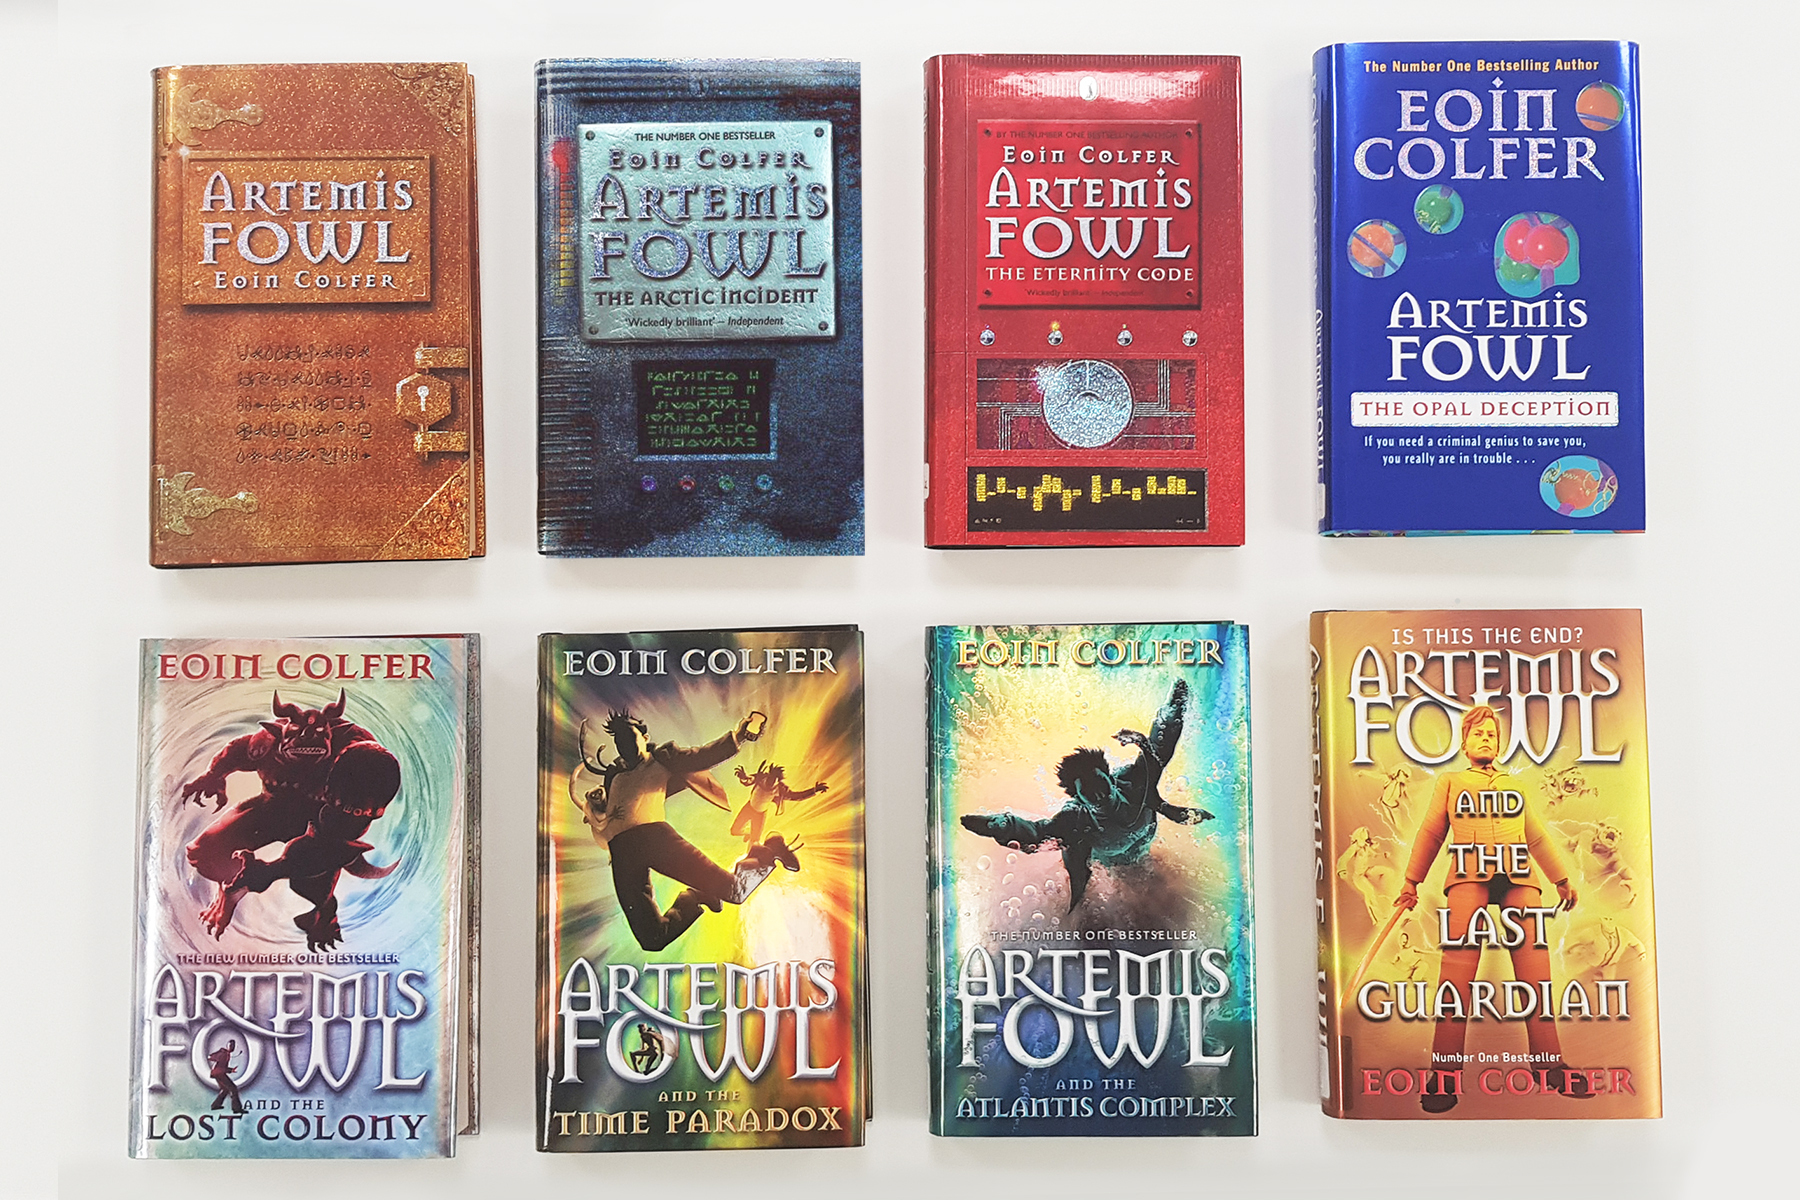 A photo of the original covers of the eight books in the Artemis Fowl series on a white background